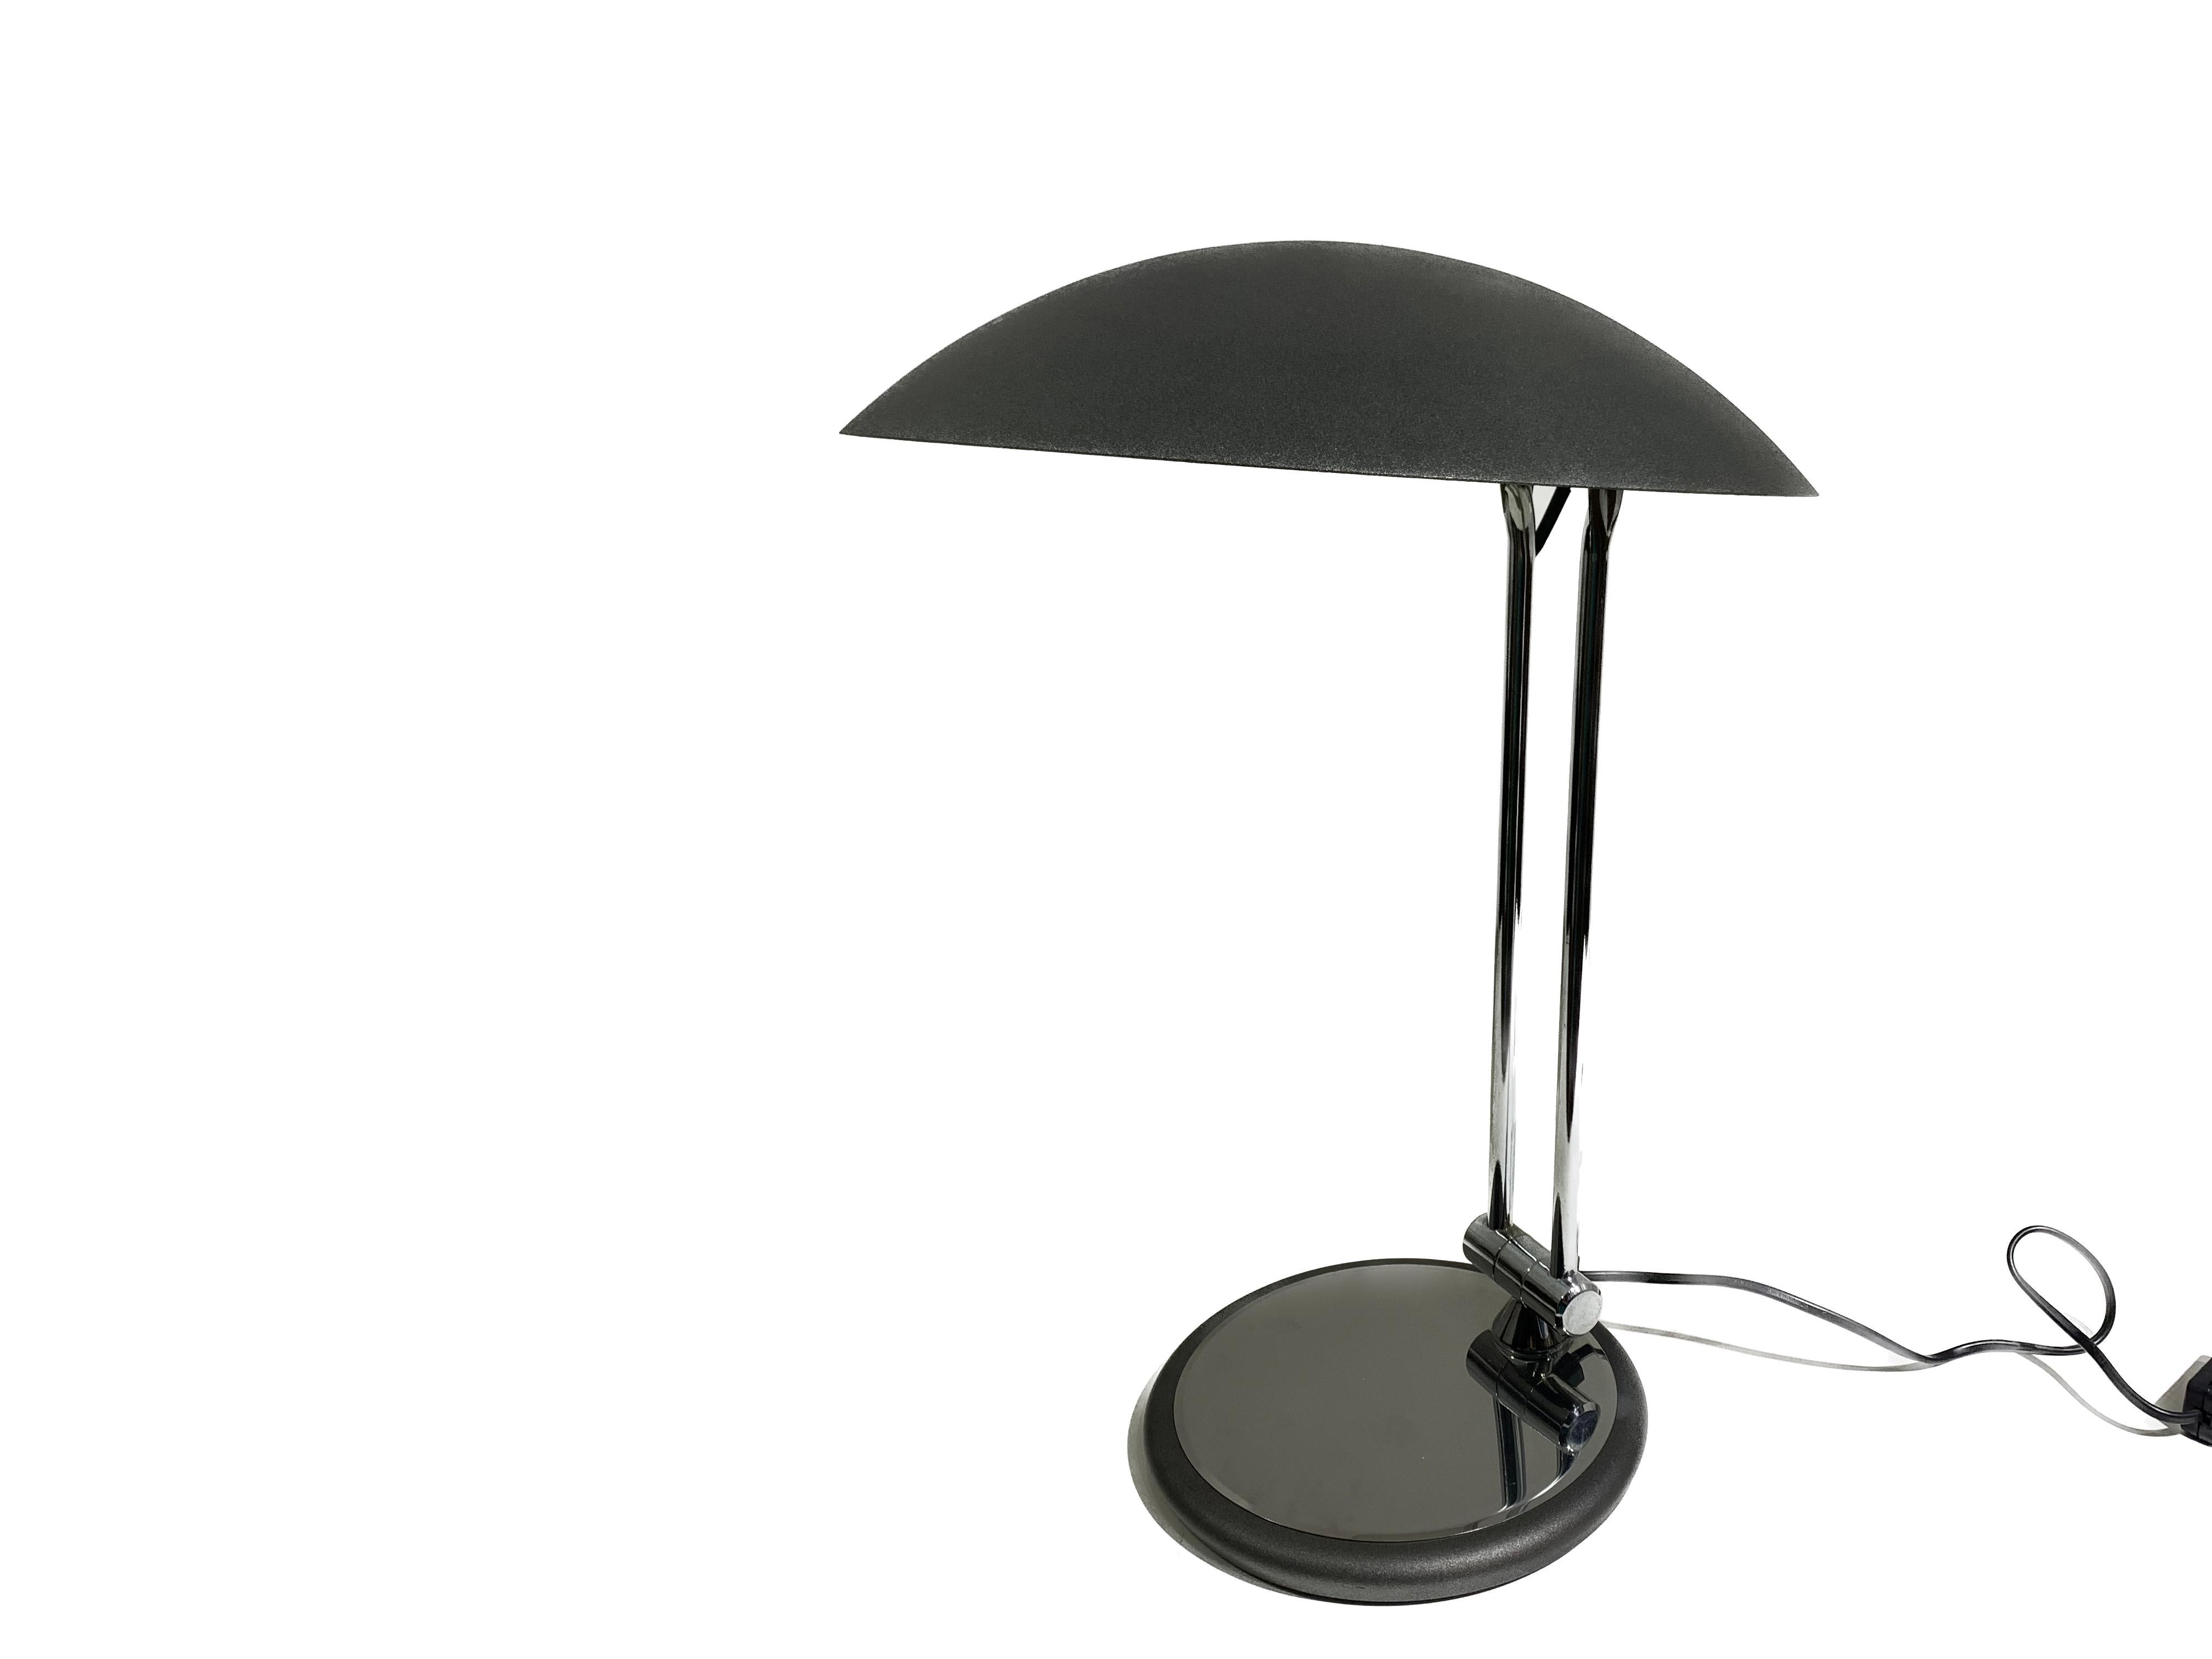 Vintage mid-century Soucoupe Table Lamp by Aluminor In Good Condition For Sale In Beirut, LB